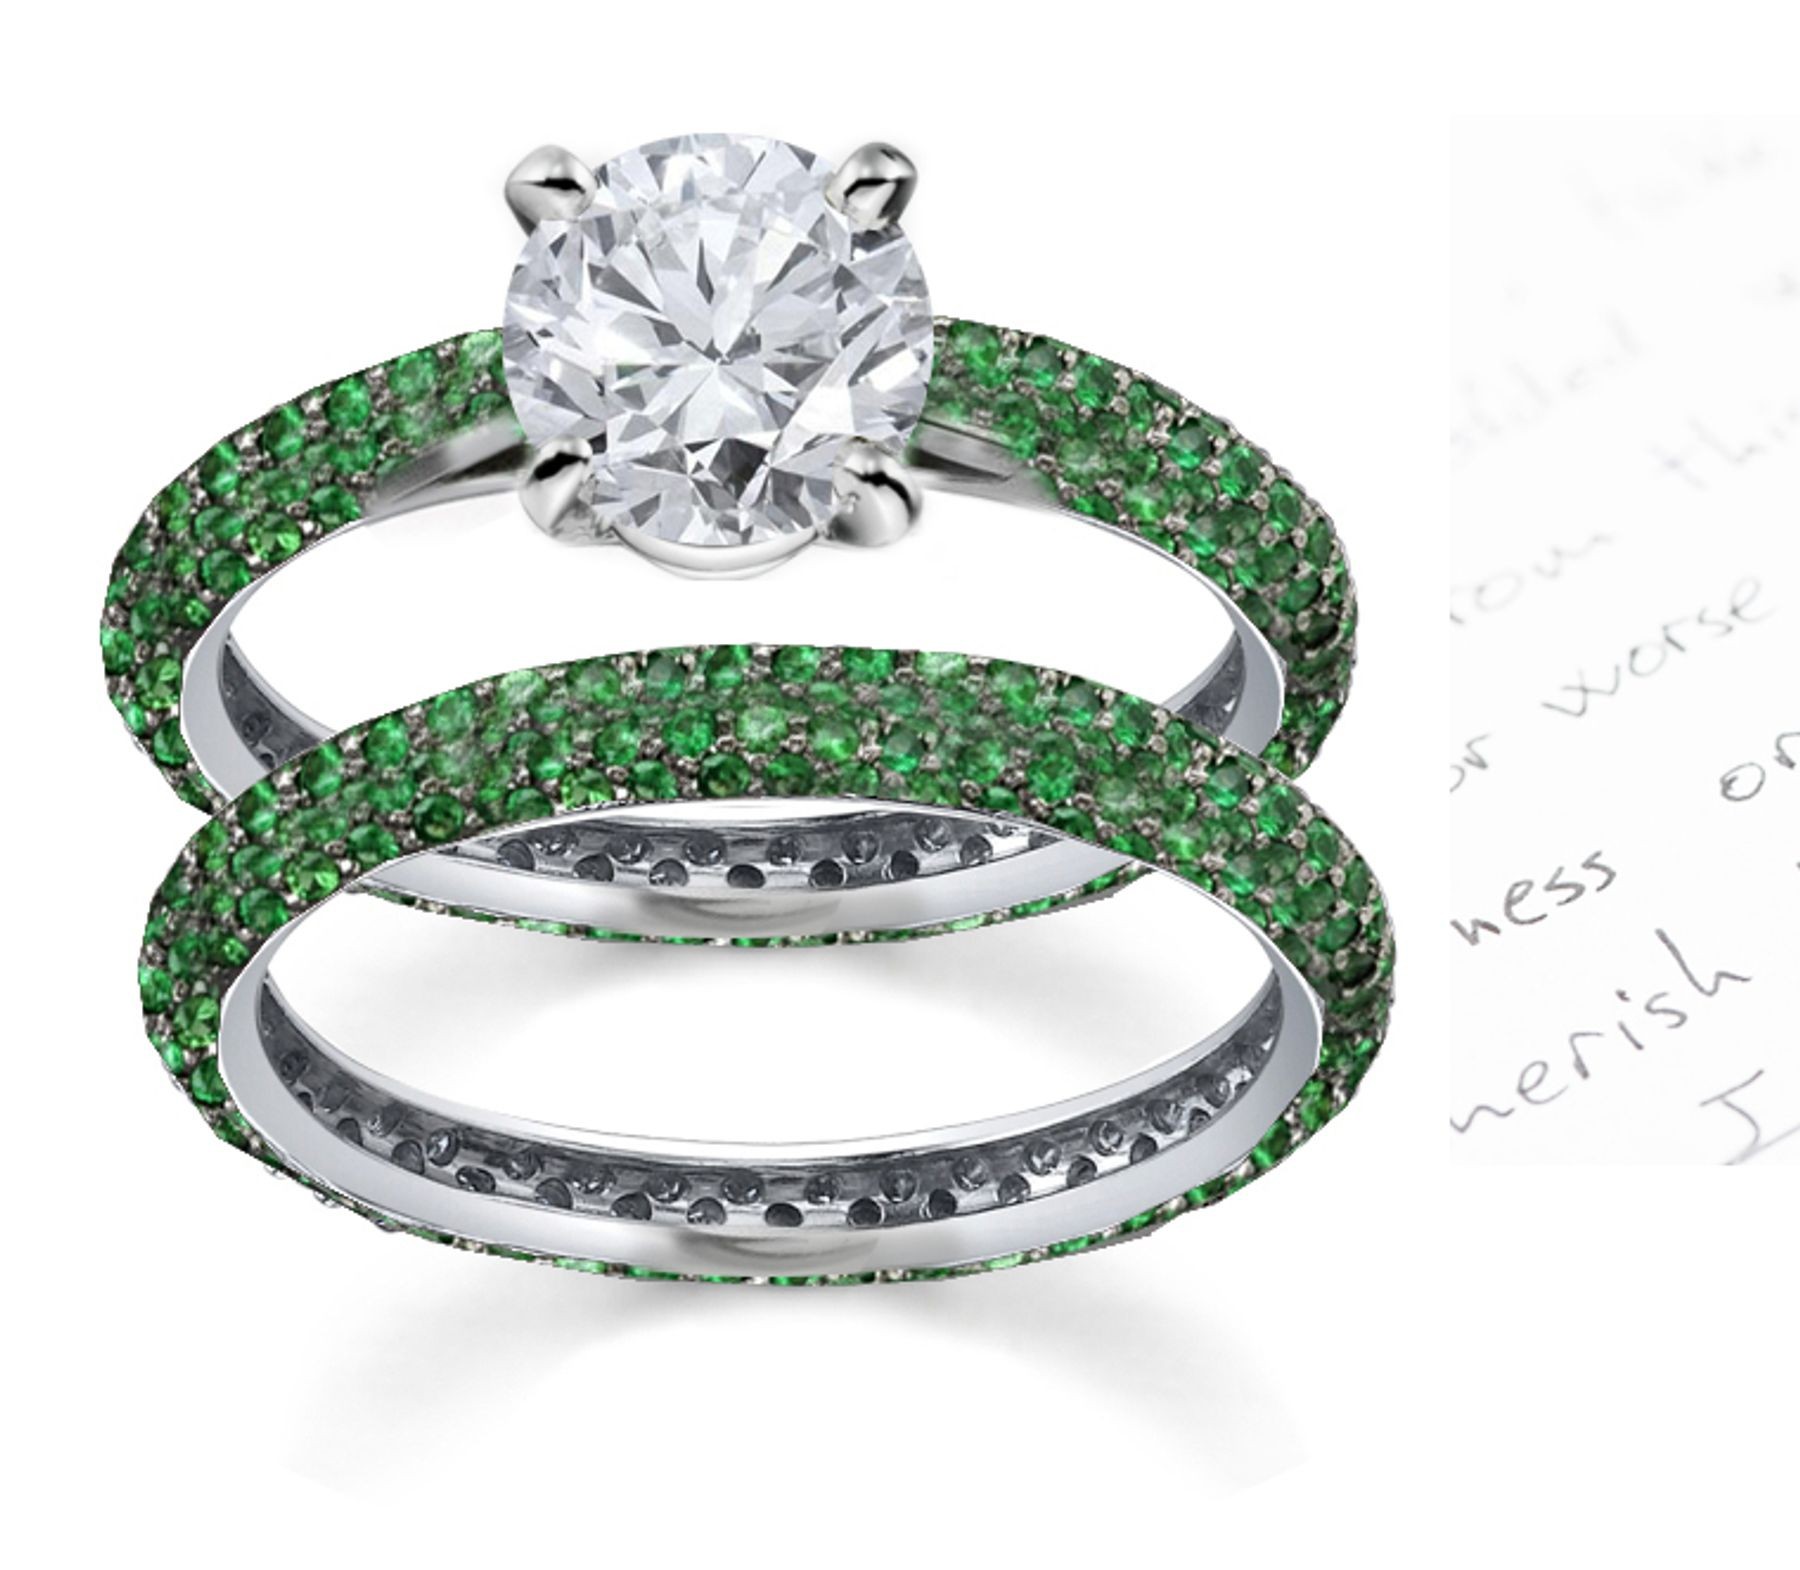 Exclusive Styles: French Pave' Emerald & Diamond Ring in 14k White Gold & Platinum